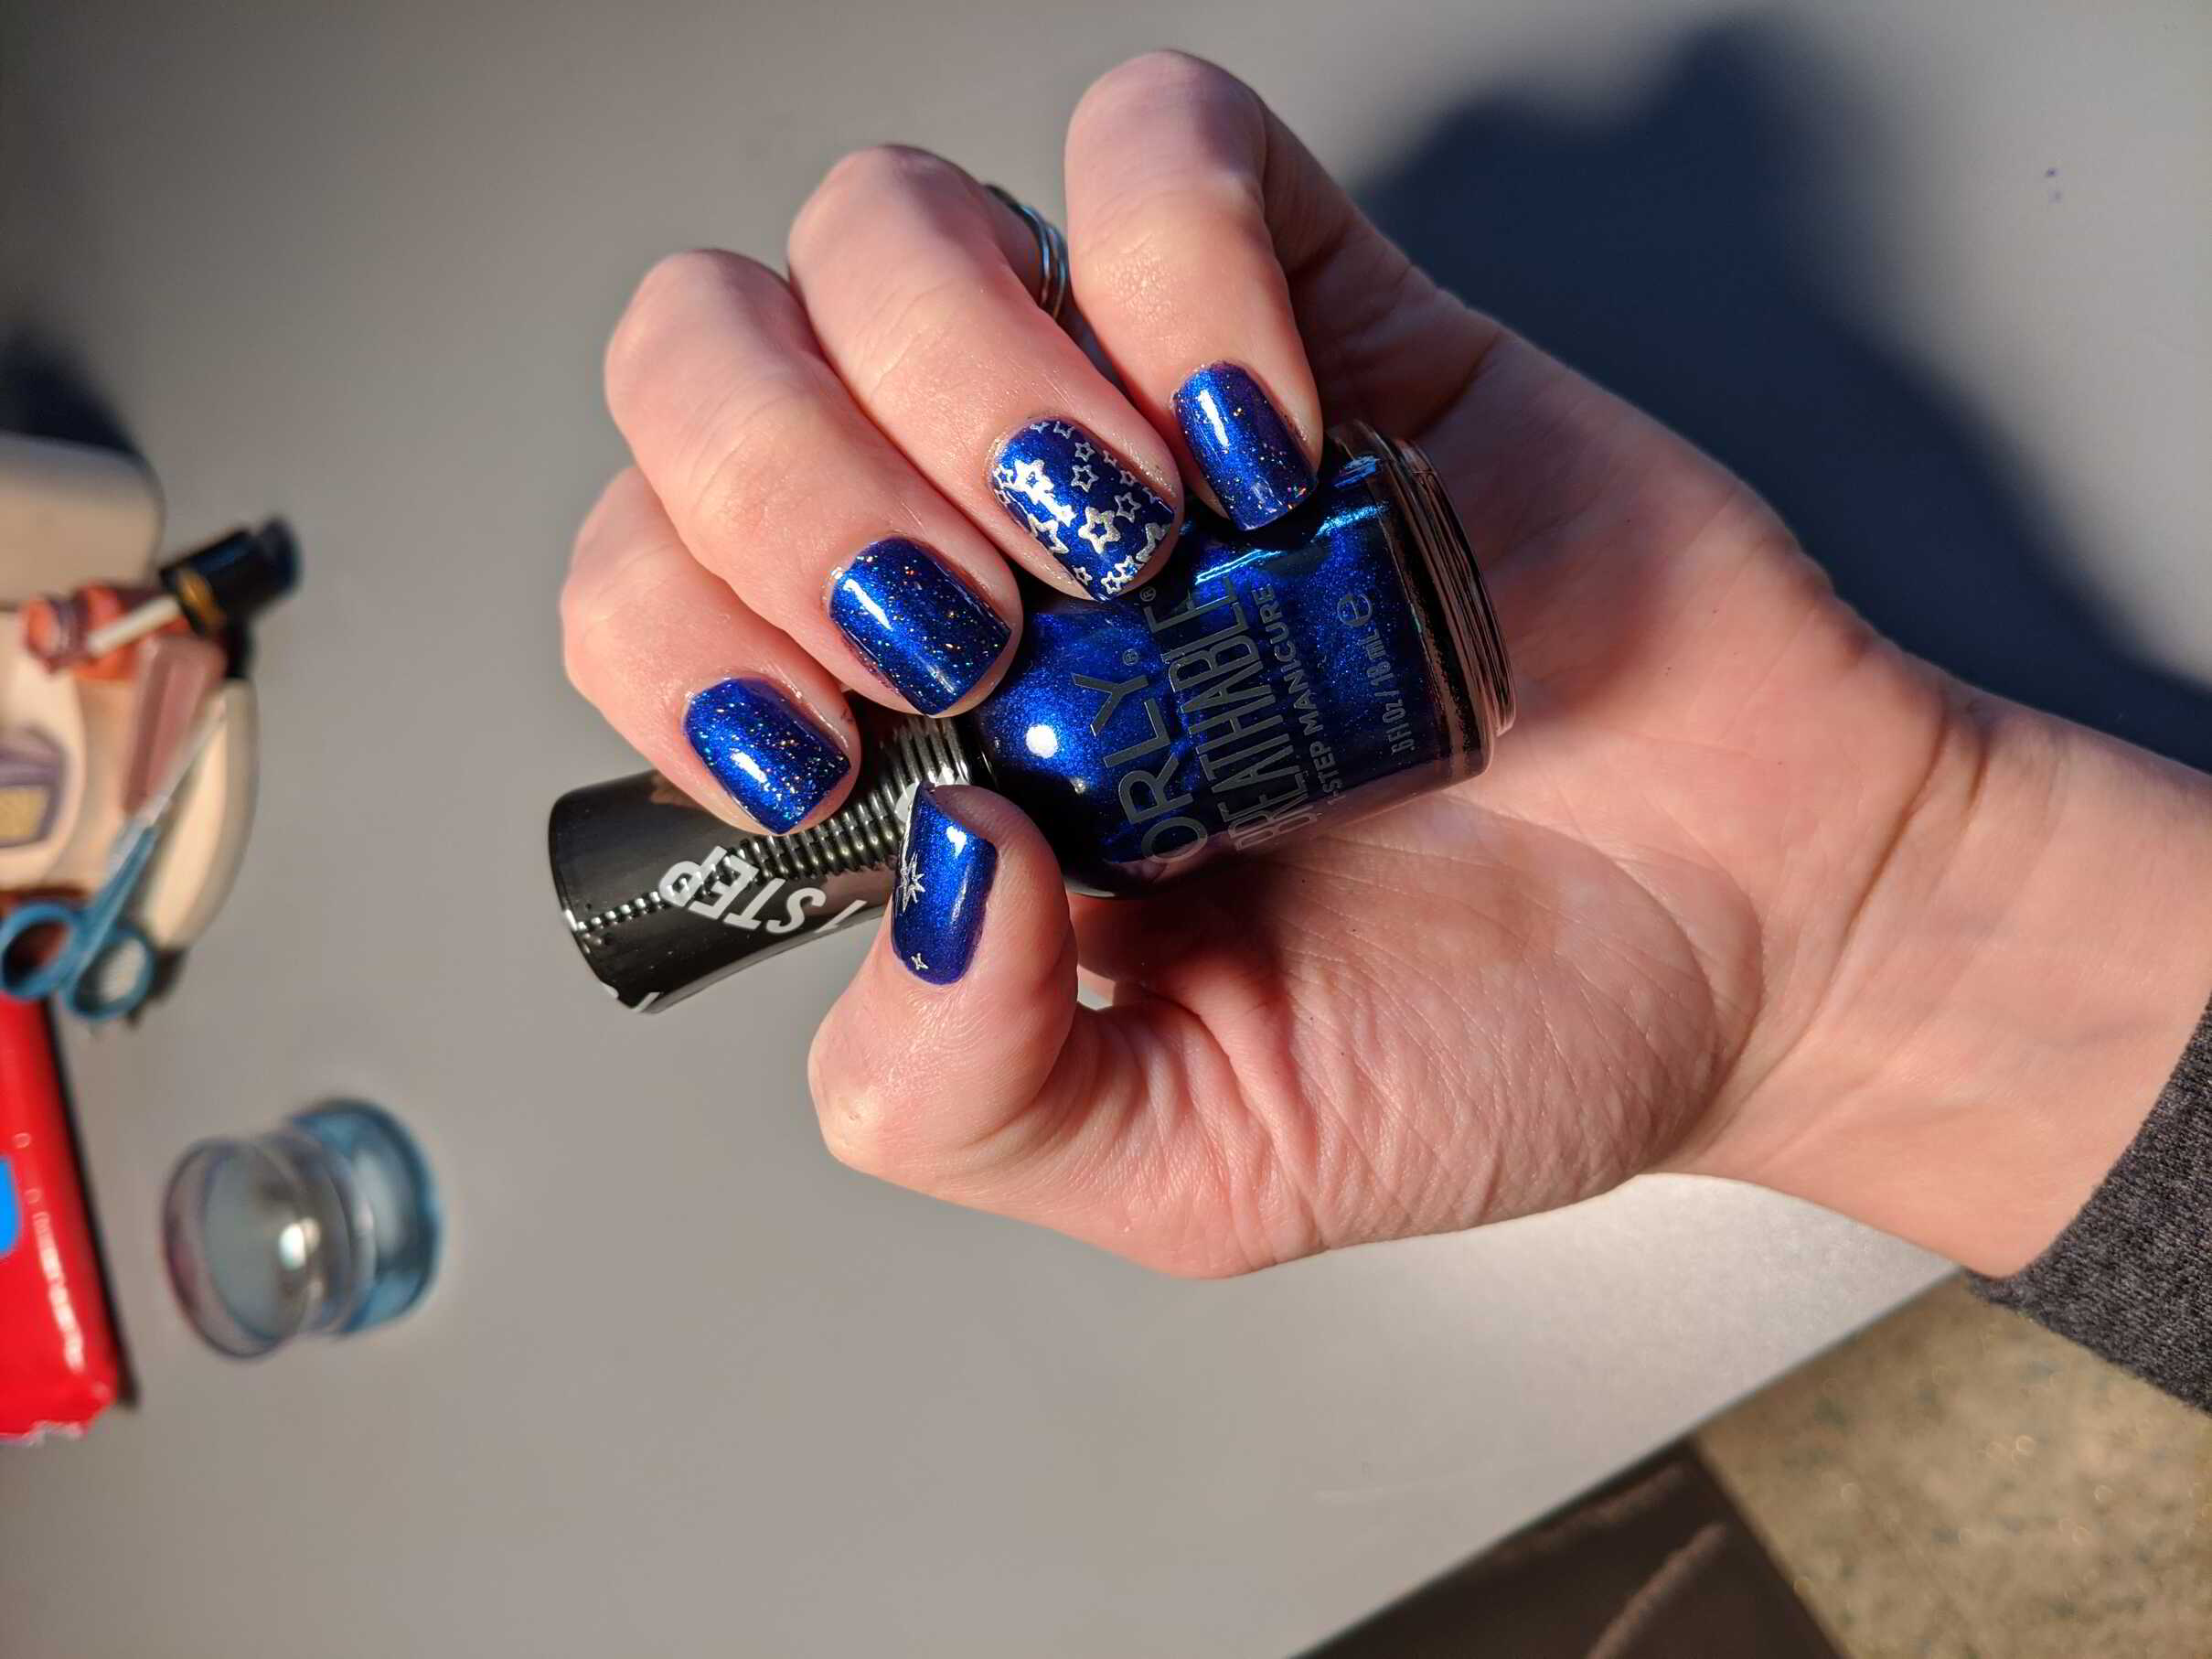 Nail polish manicure of shade Orly You're on Sapphire